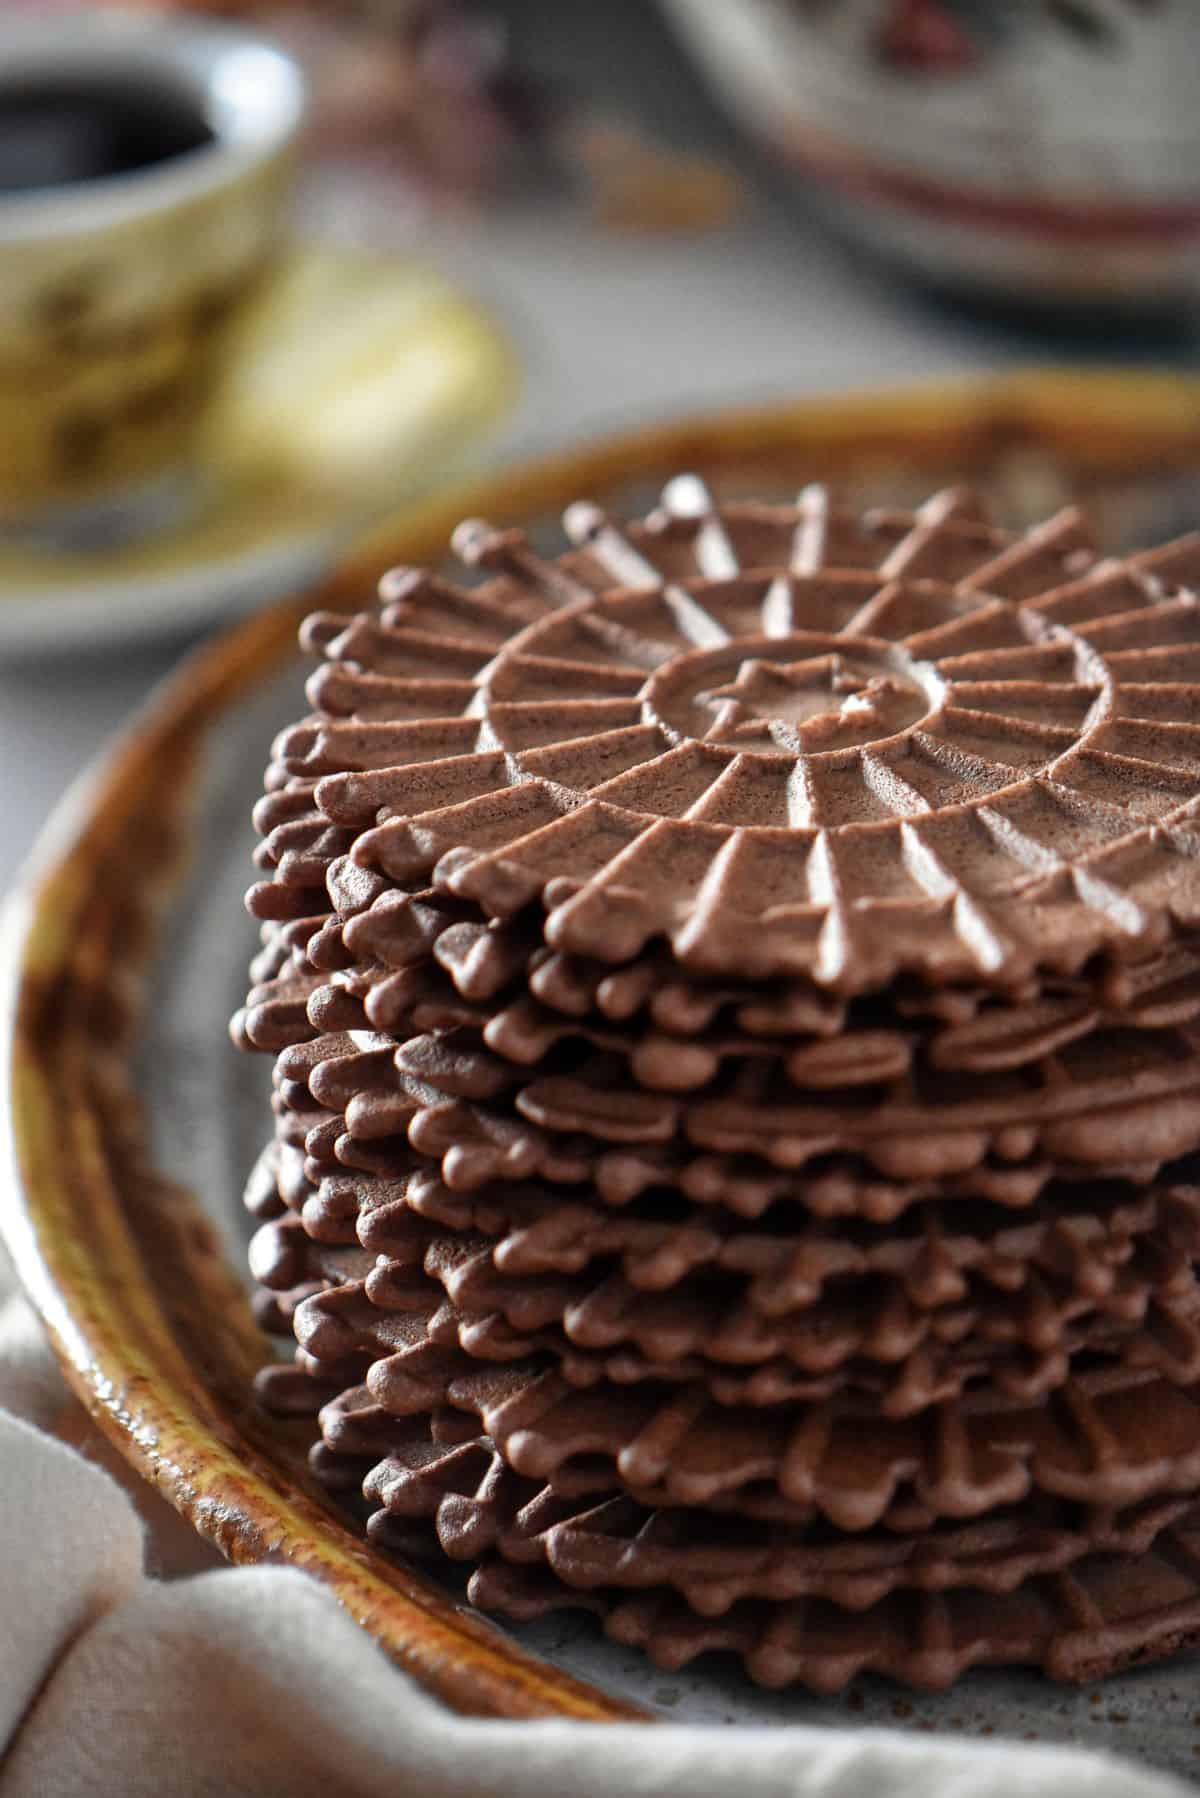 A stack of chocolate pizzelle on a platter.